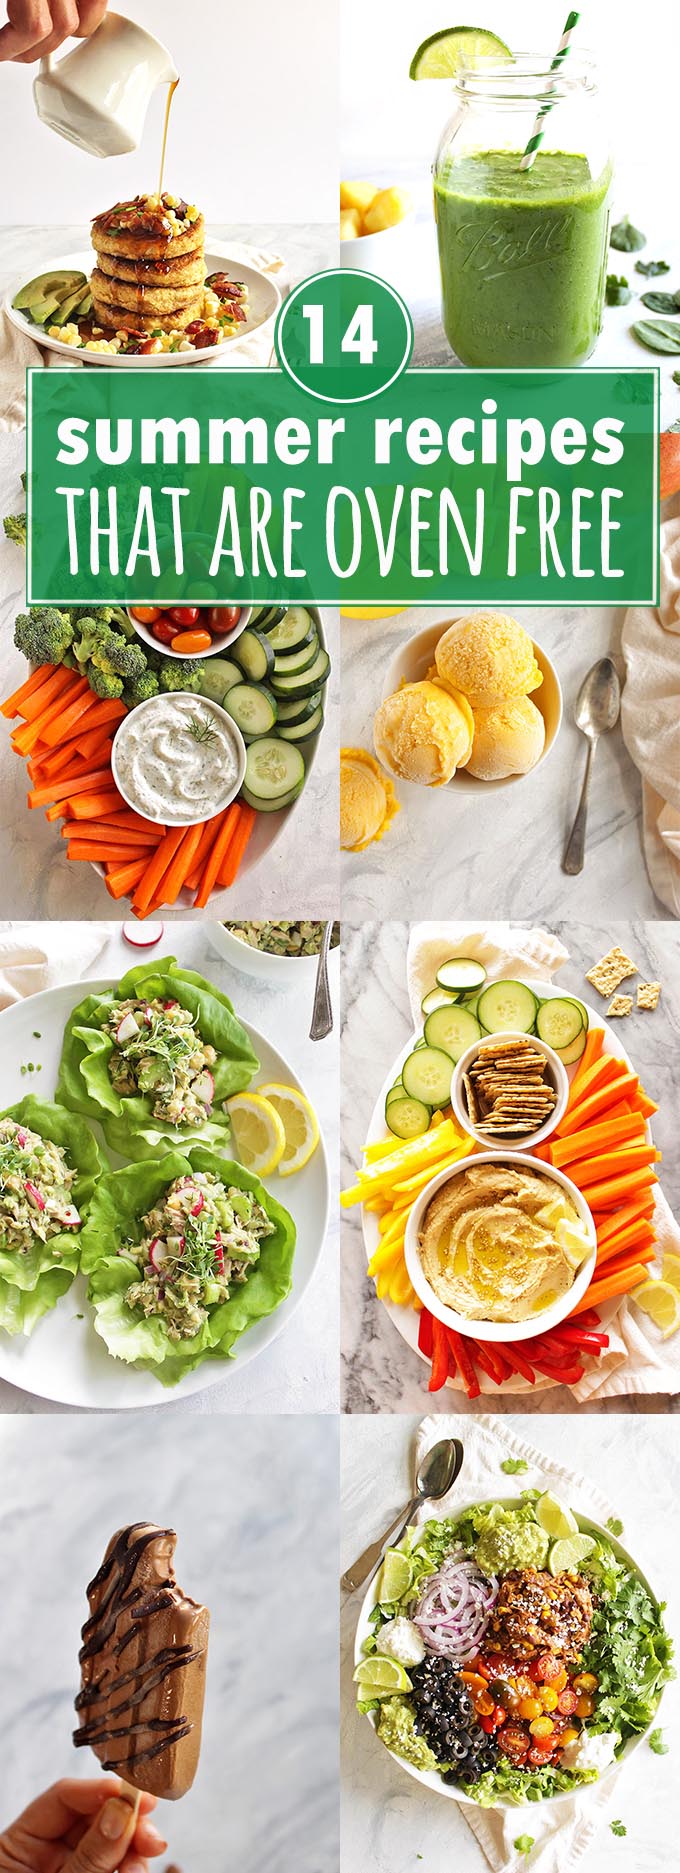 A collection of 14 summer recipes that are oven free. There are a mix of salads, frozen desserts, dips, and breakfast! #summer #recipes #glutenfree | robustrecipes.com